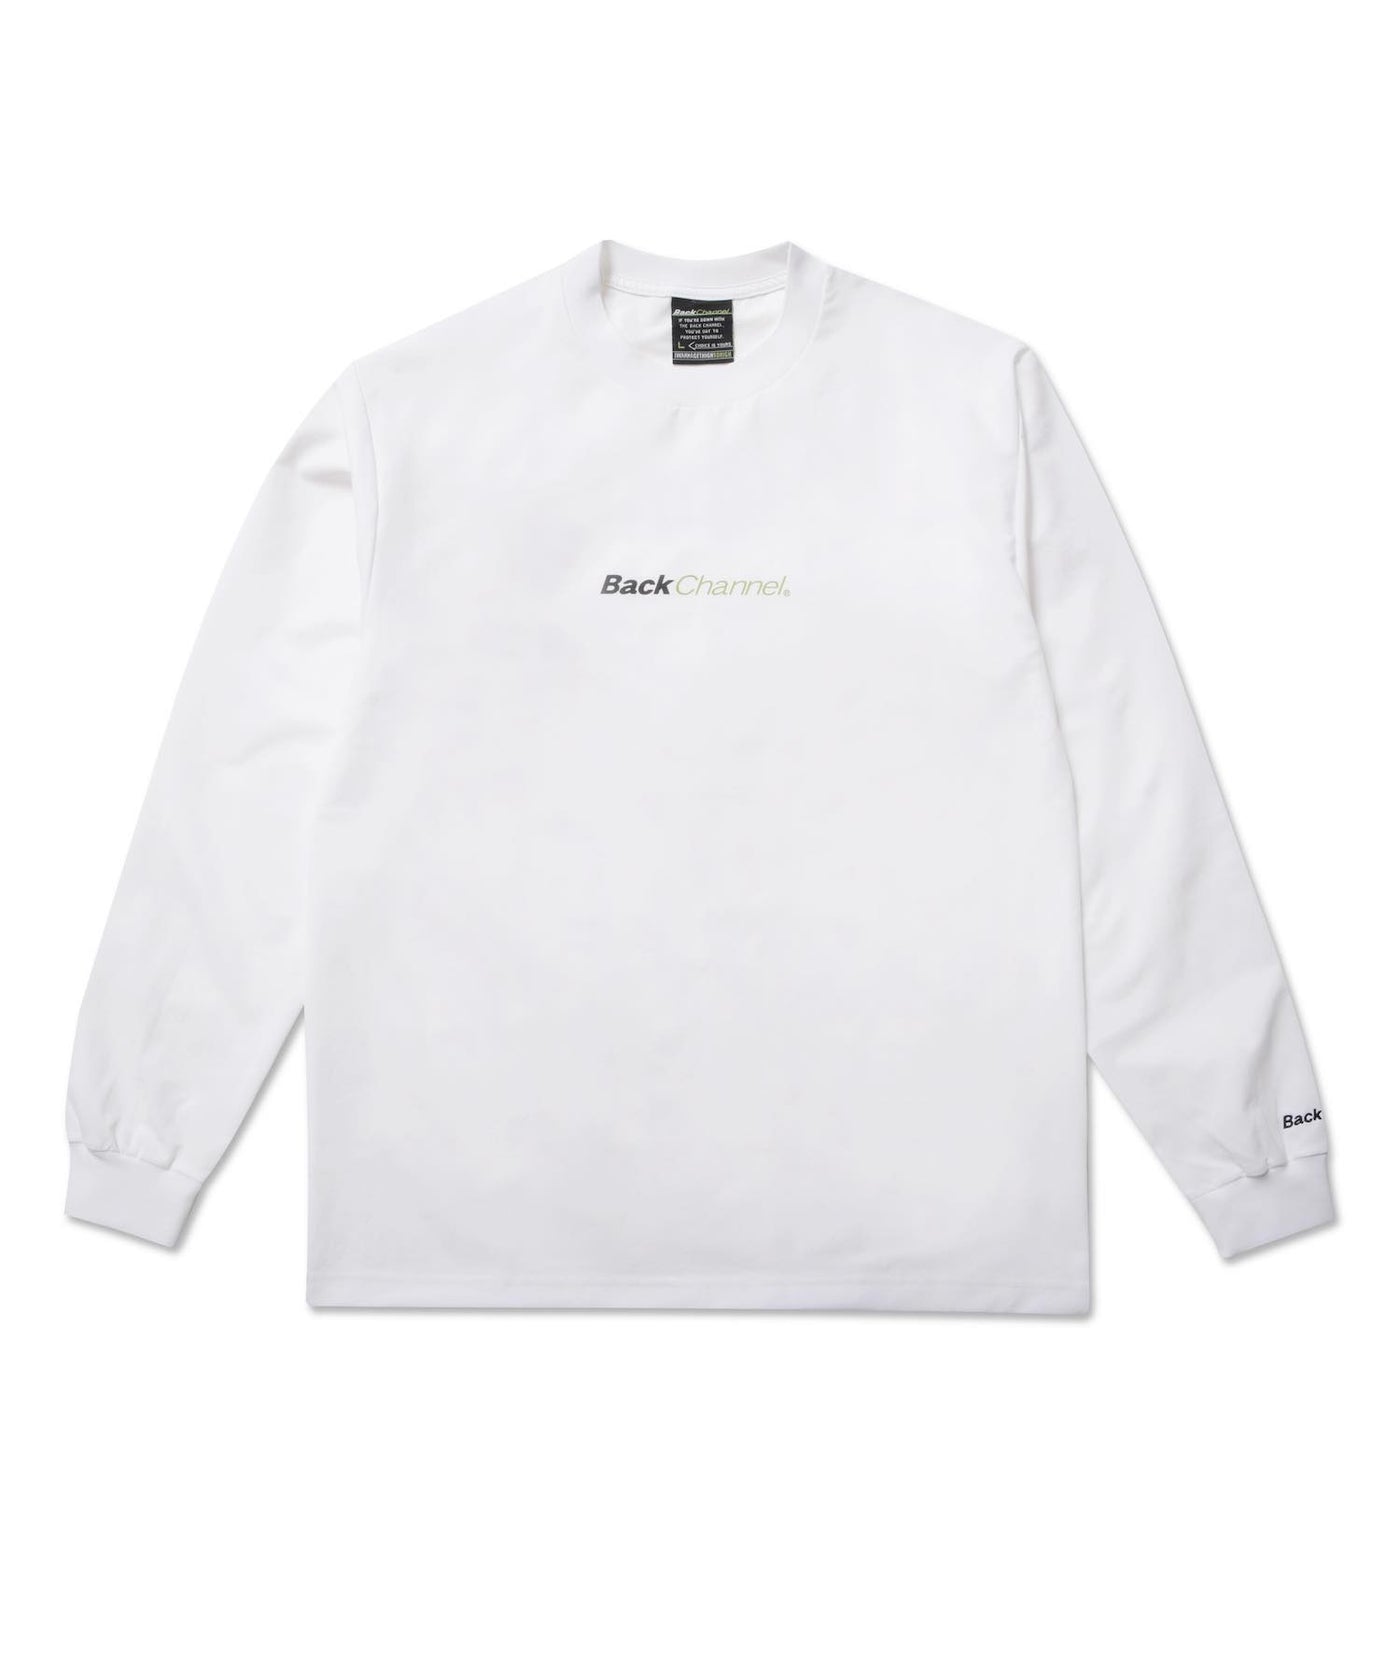 OFFICIAL LOGO STRETCH L/S TEE